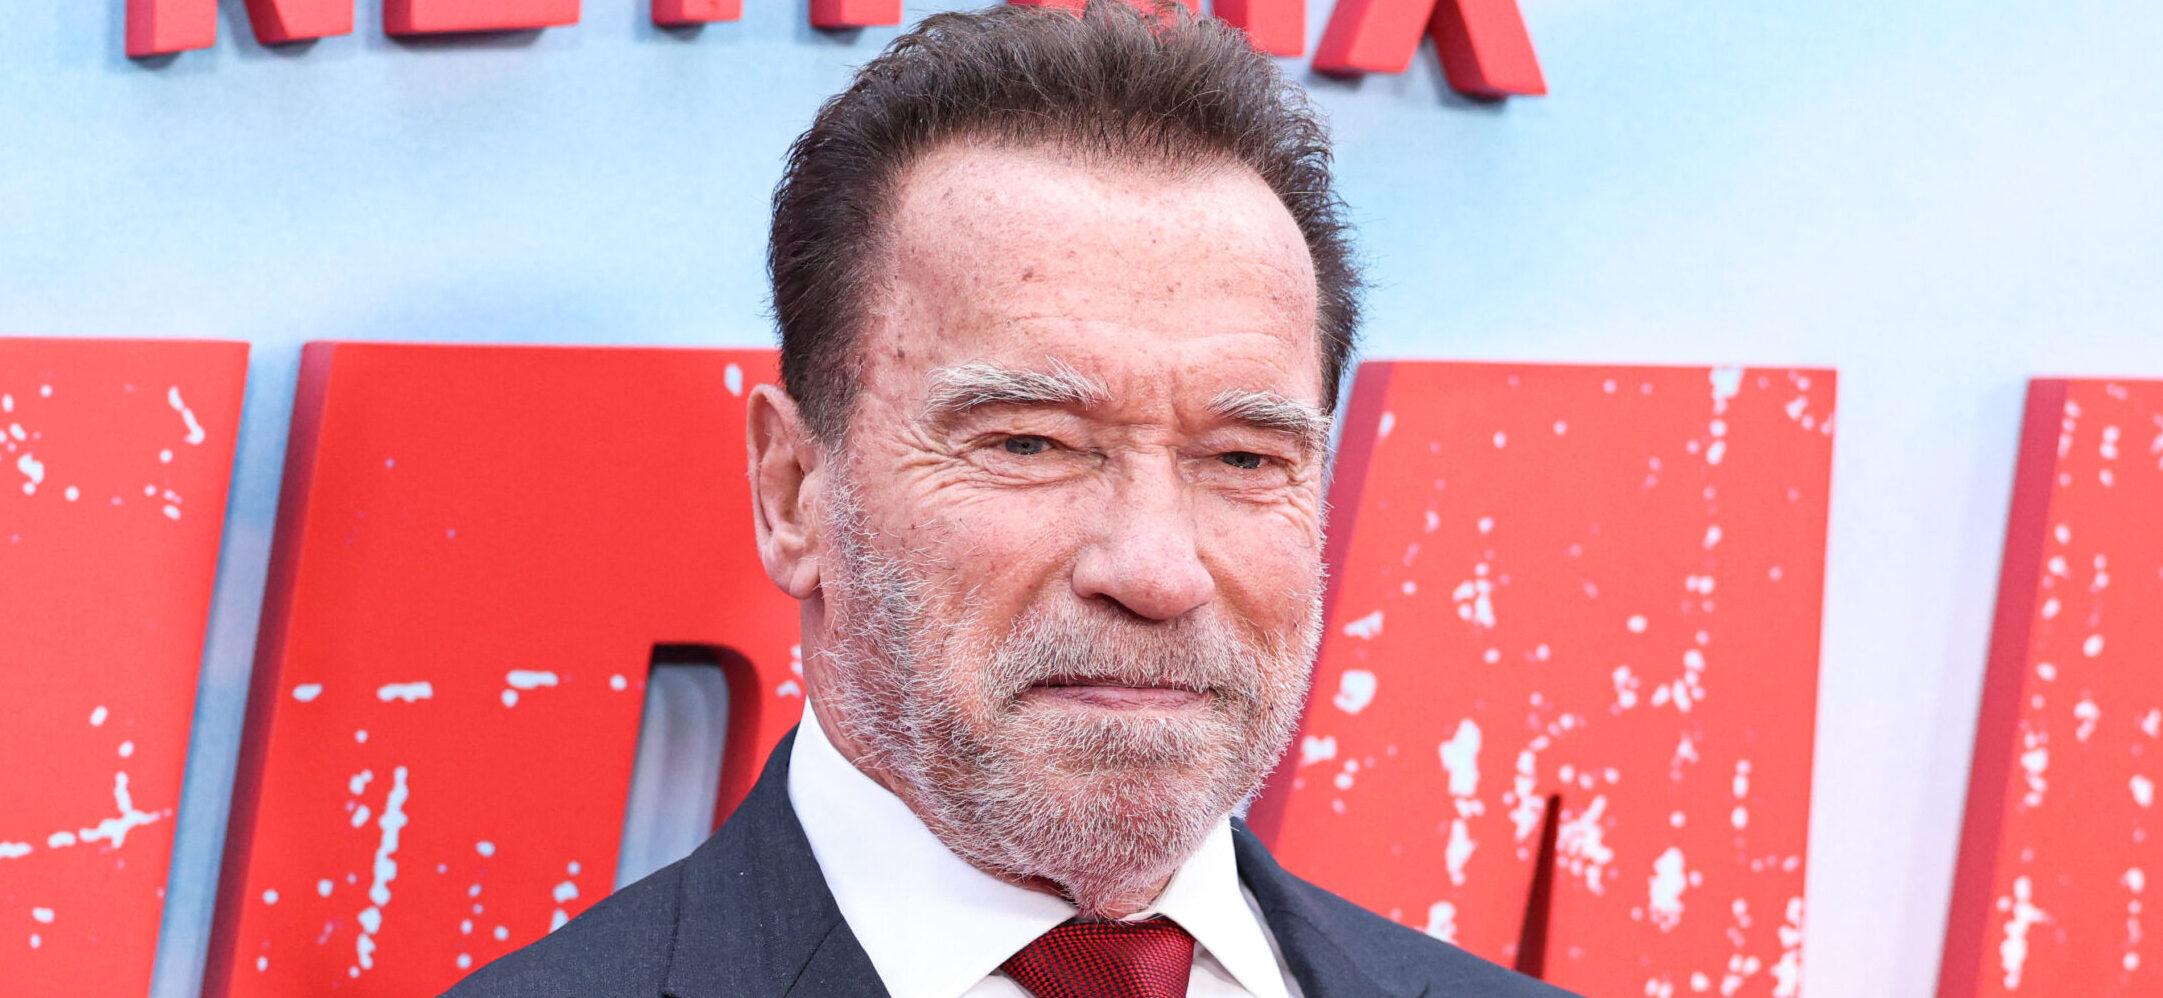 Arnold Schwarzenegger Sued Over Car Accident That Left Woman ‘Permanently Disabled’